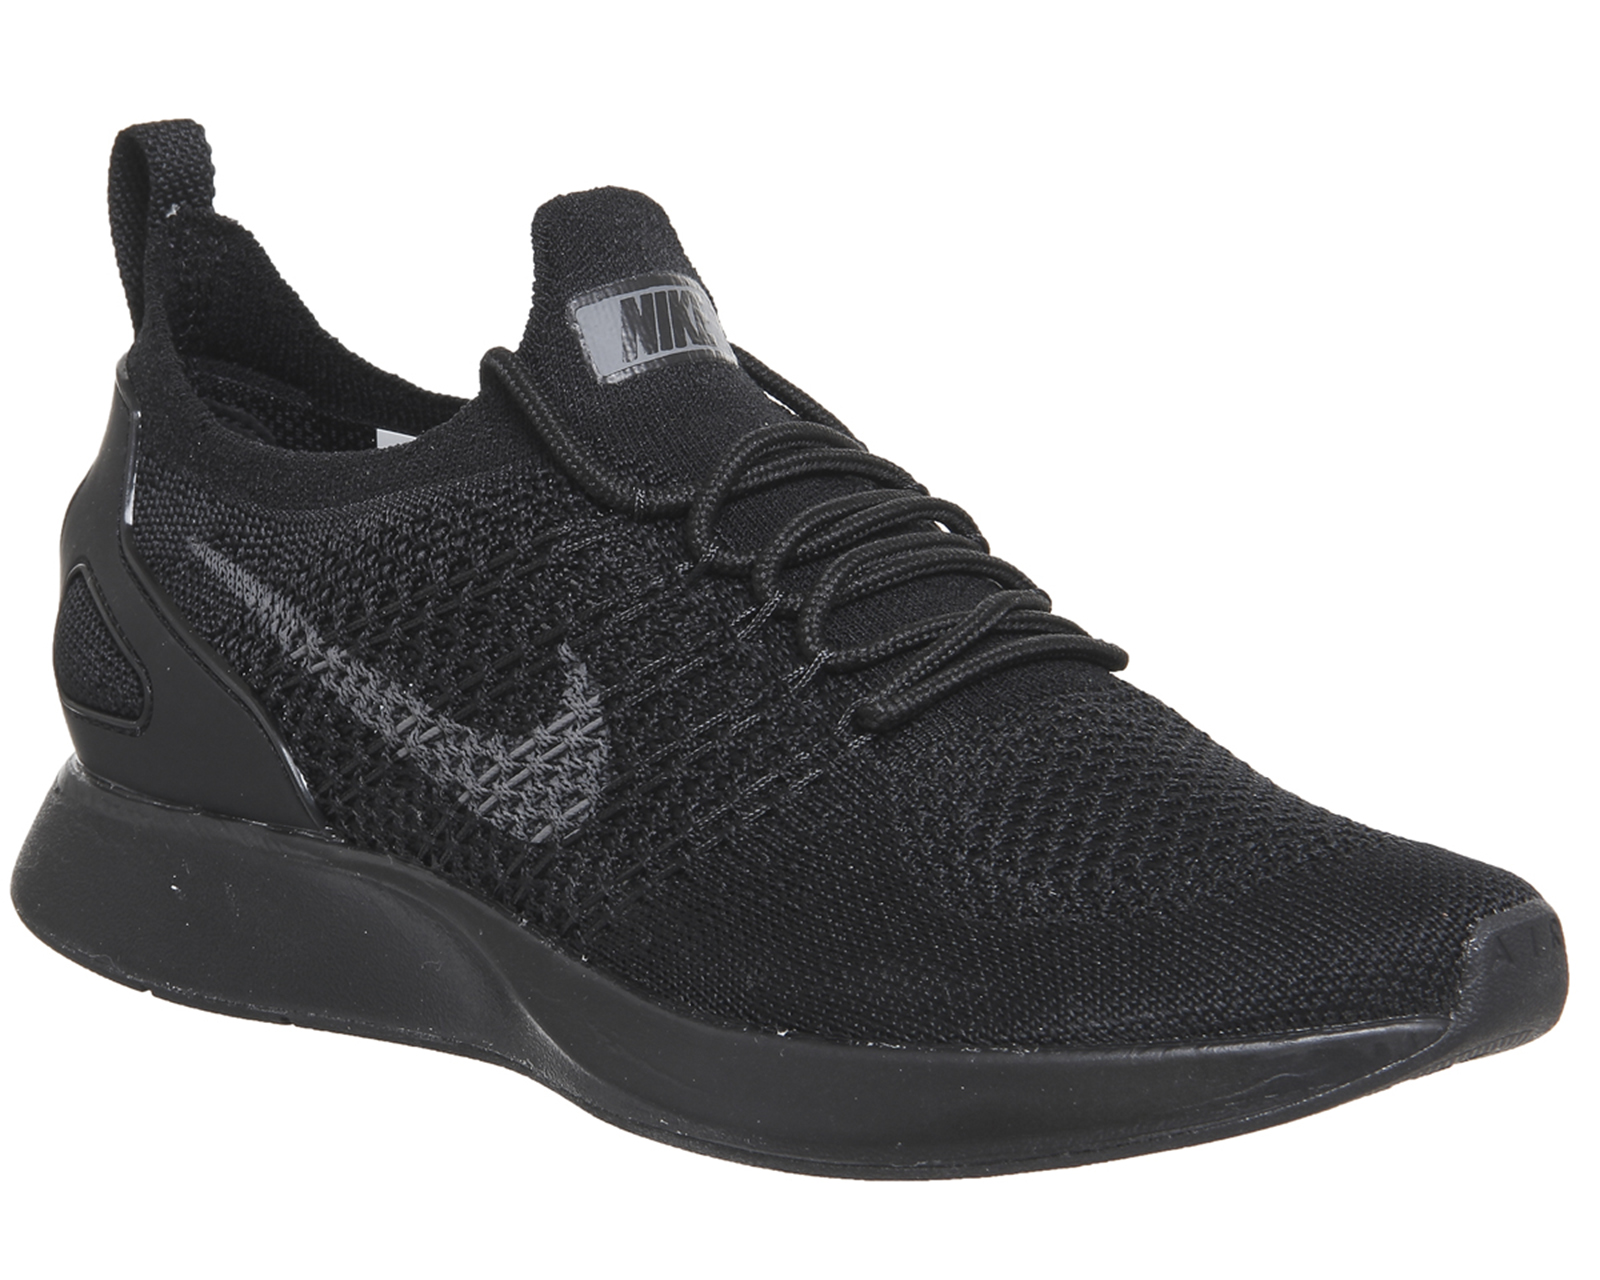 Nike Air Zoom Mariah Flyknit Racer Black Mono F - Hers trainers